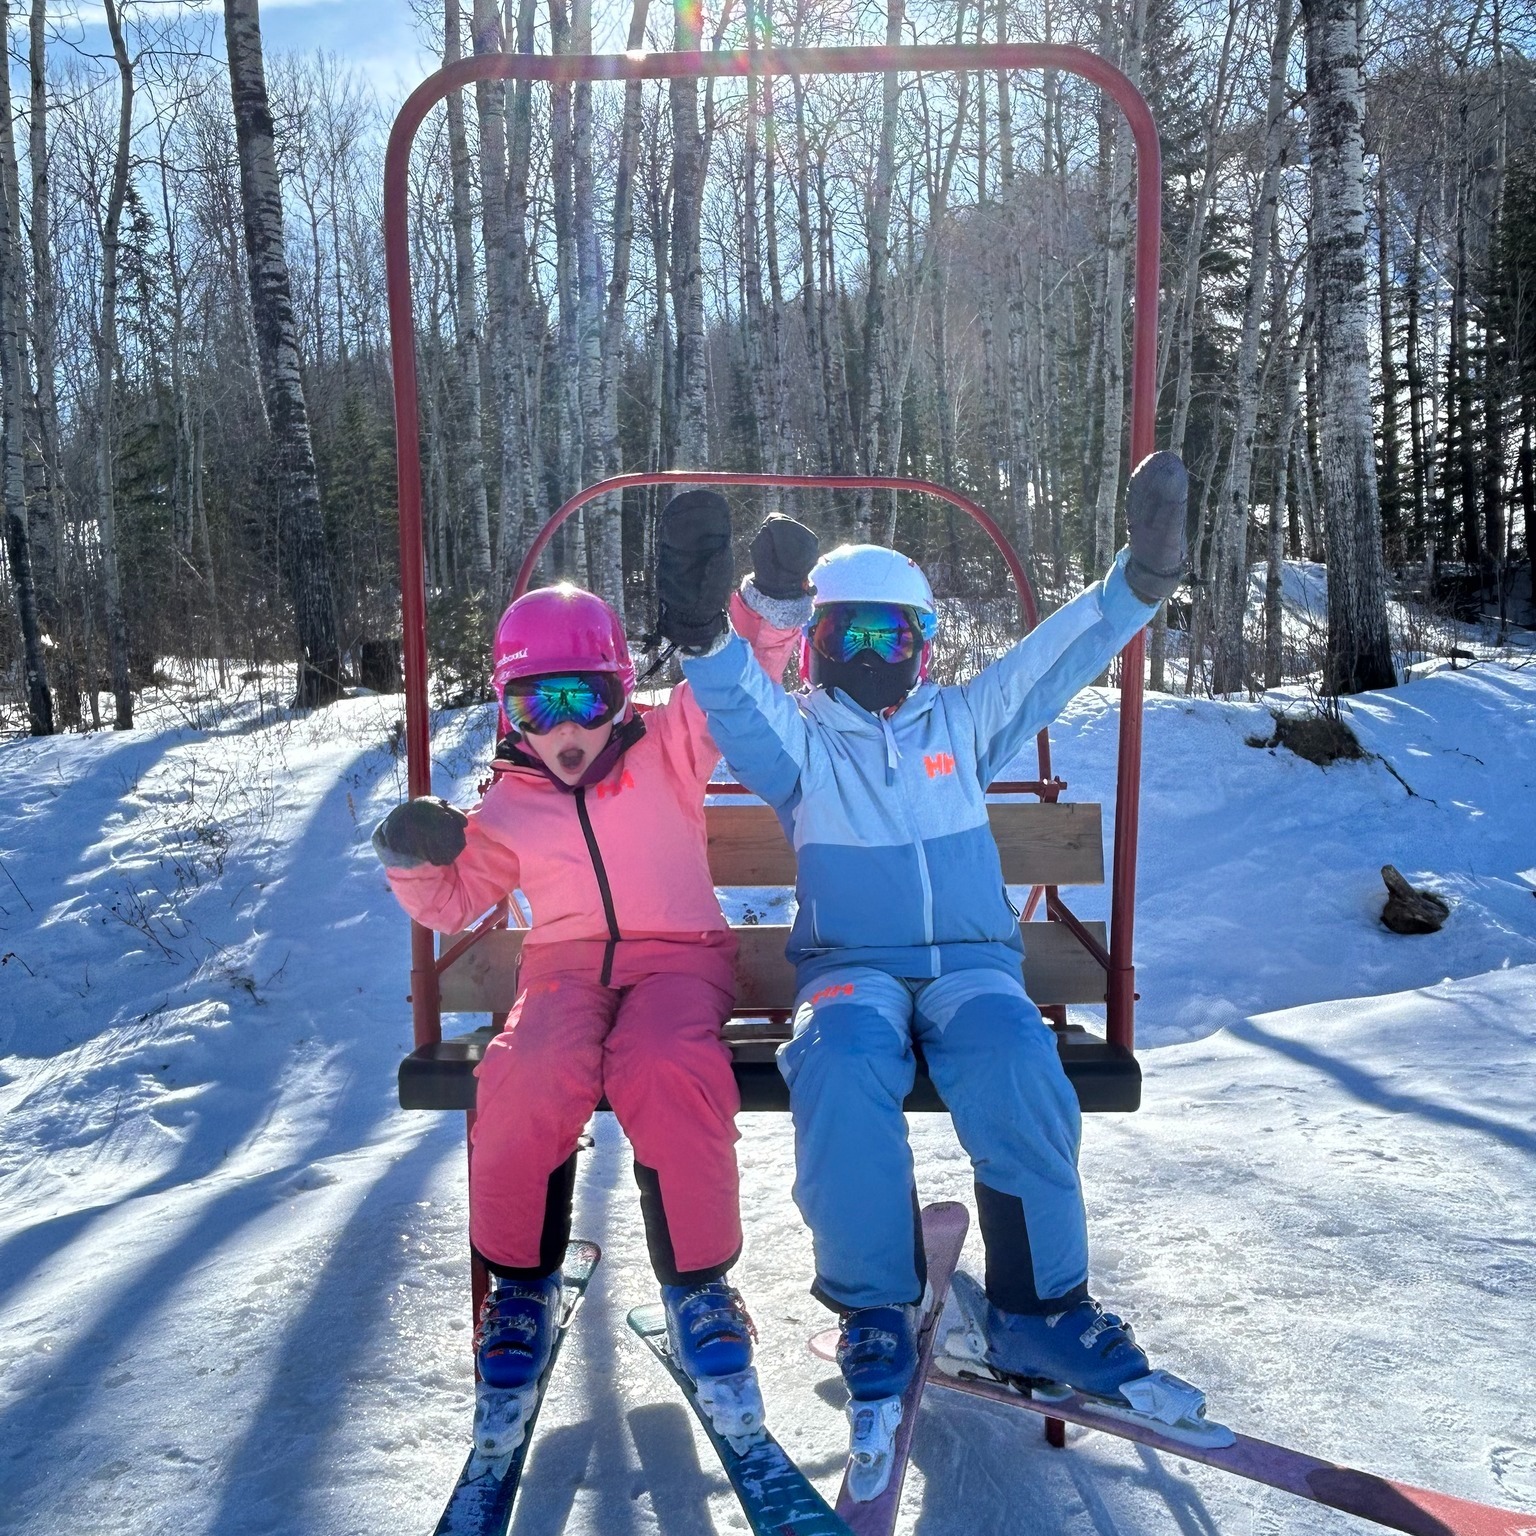 two cheering kids with arms raised, sitting on a ski lift above a treed ski hill on a sunny winter day.